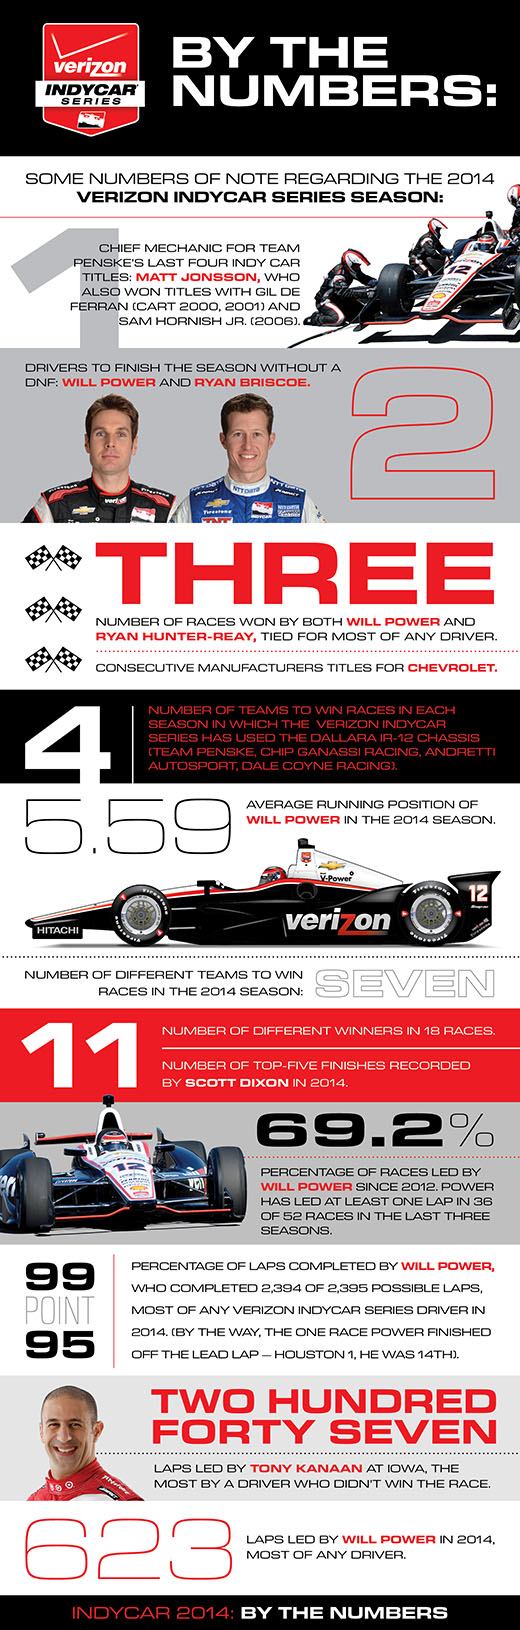 By The Numbers - 2014 Season In Review